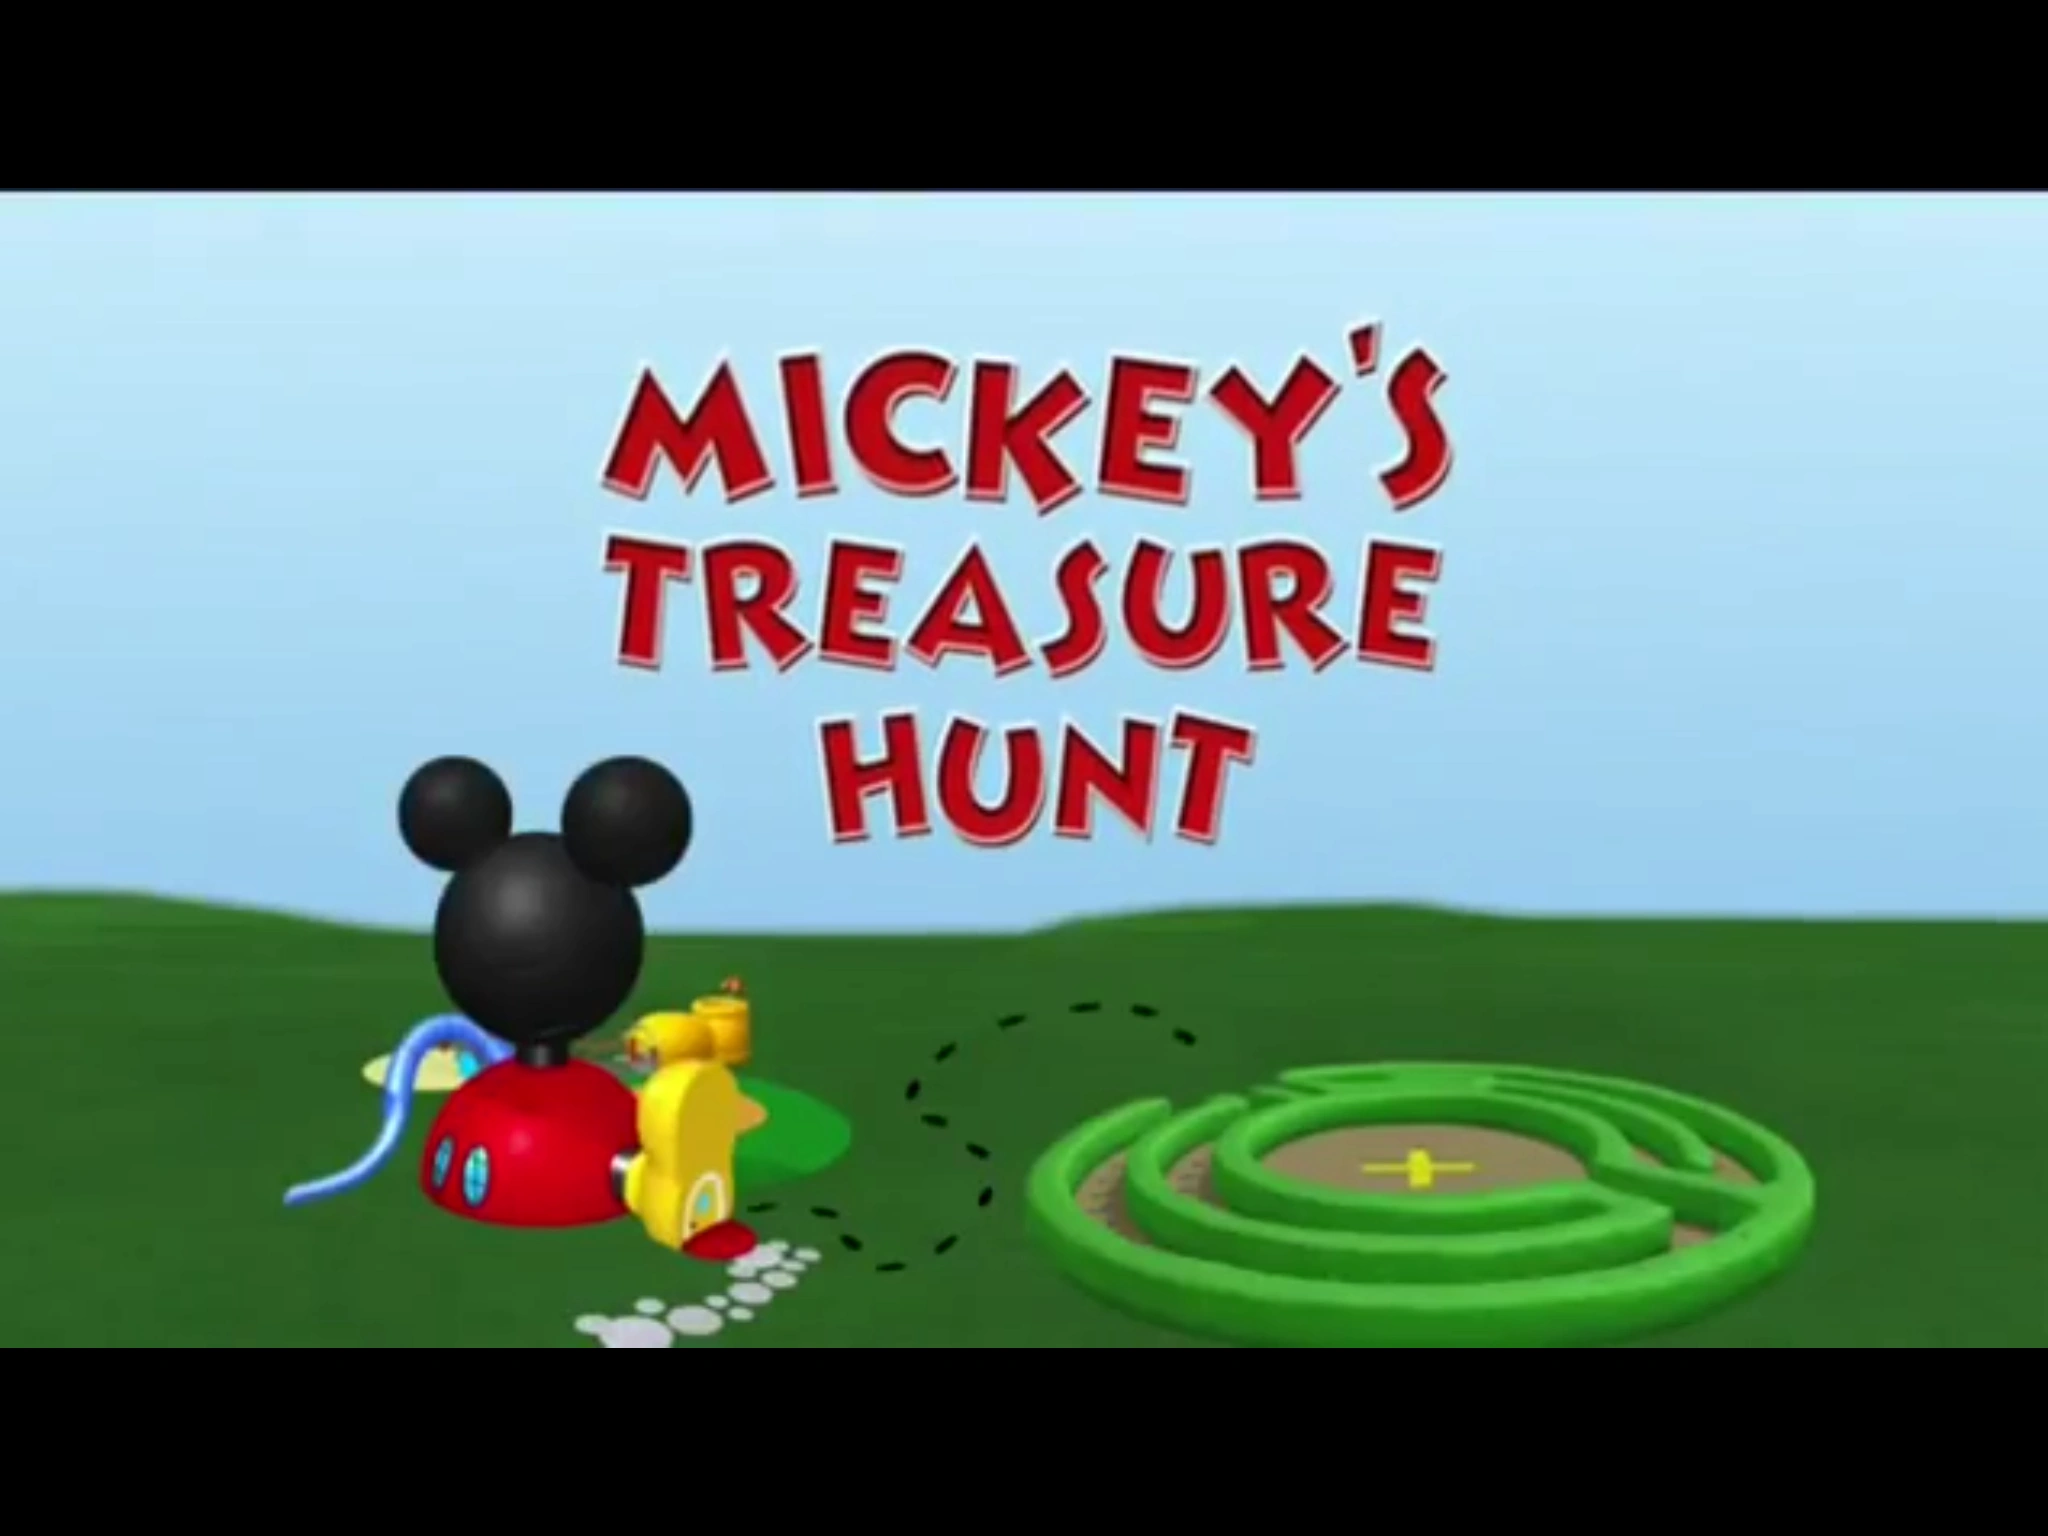 The Mouseketools In Mickey's Mousekedour Adventure 